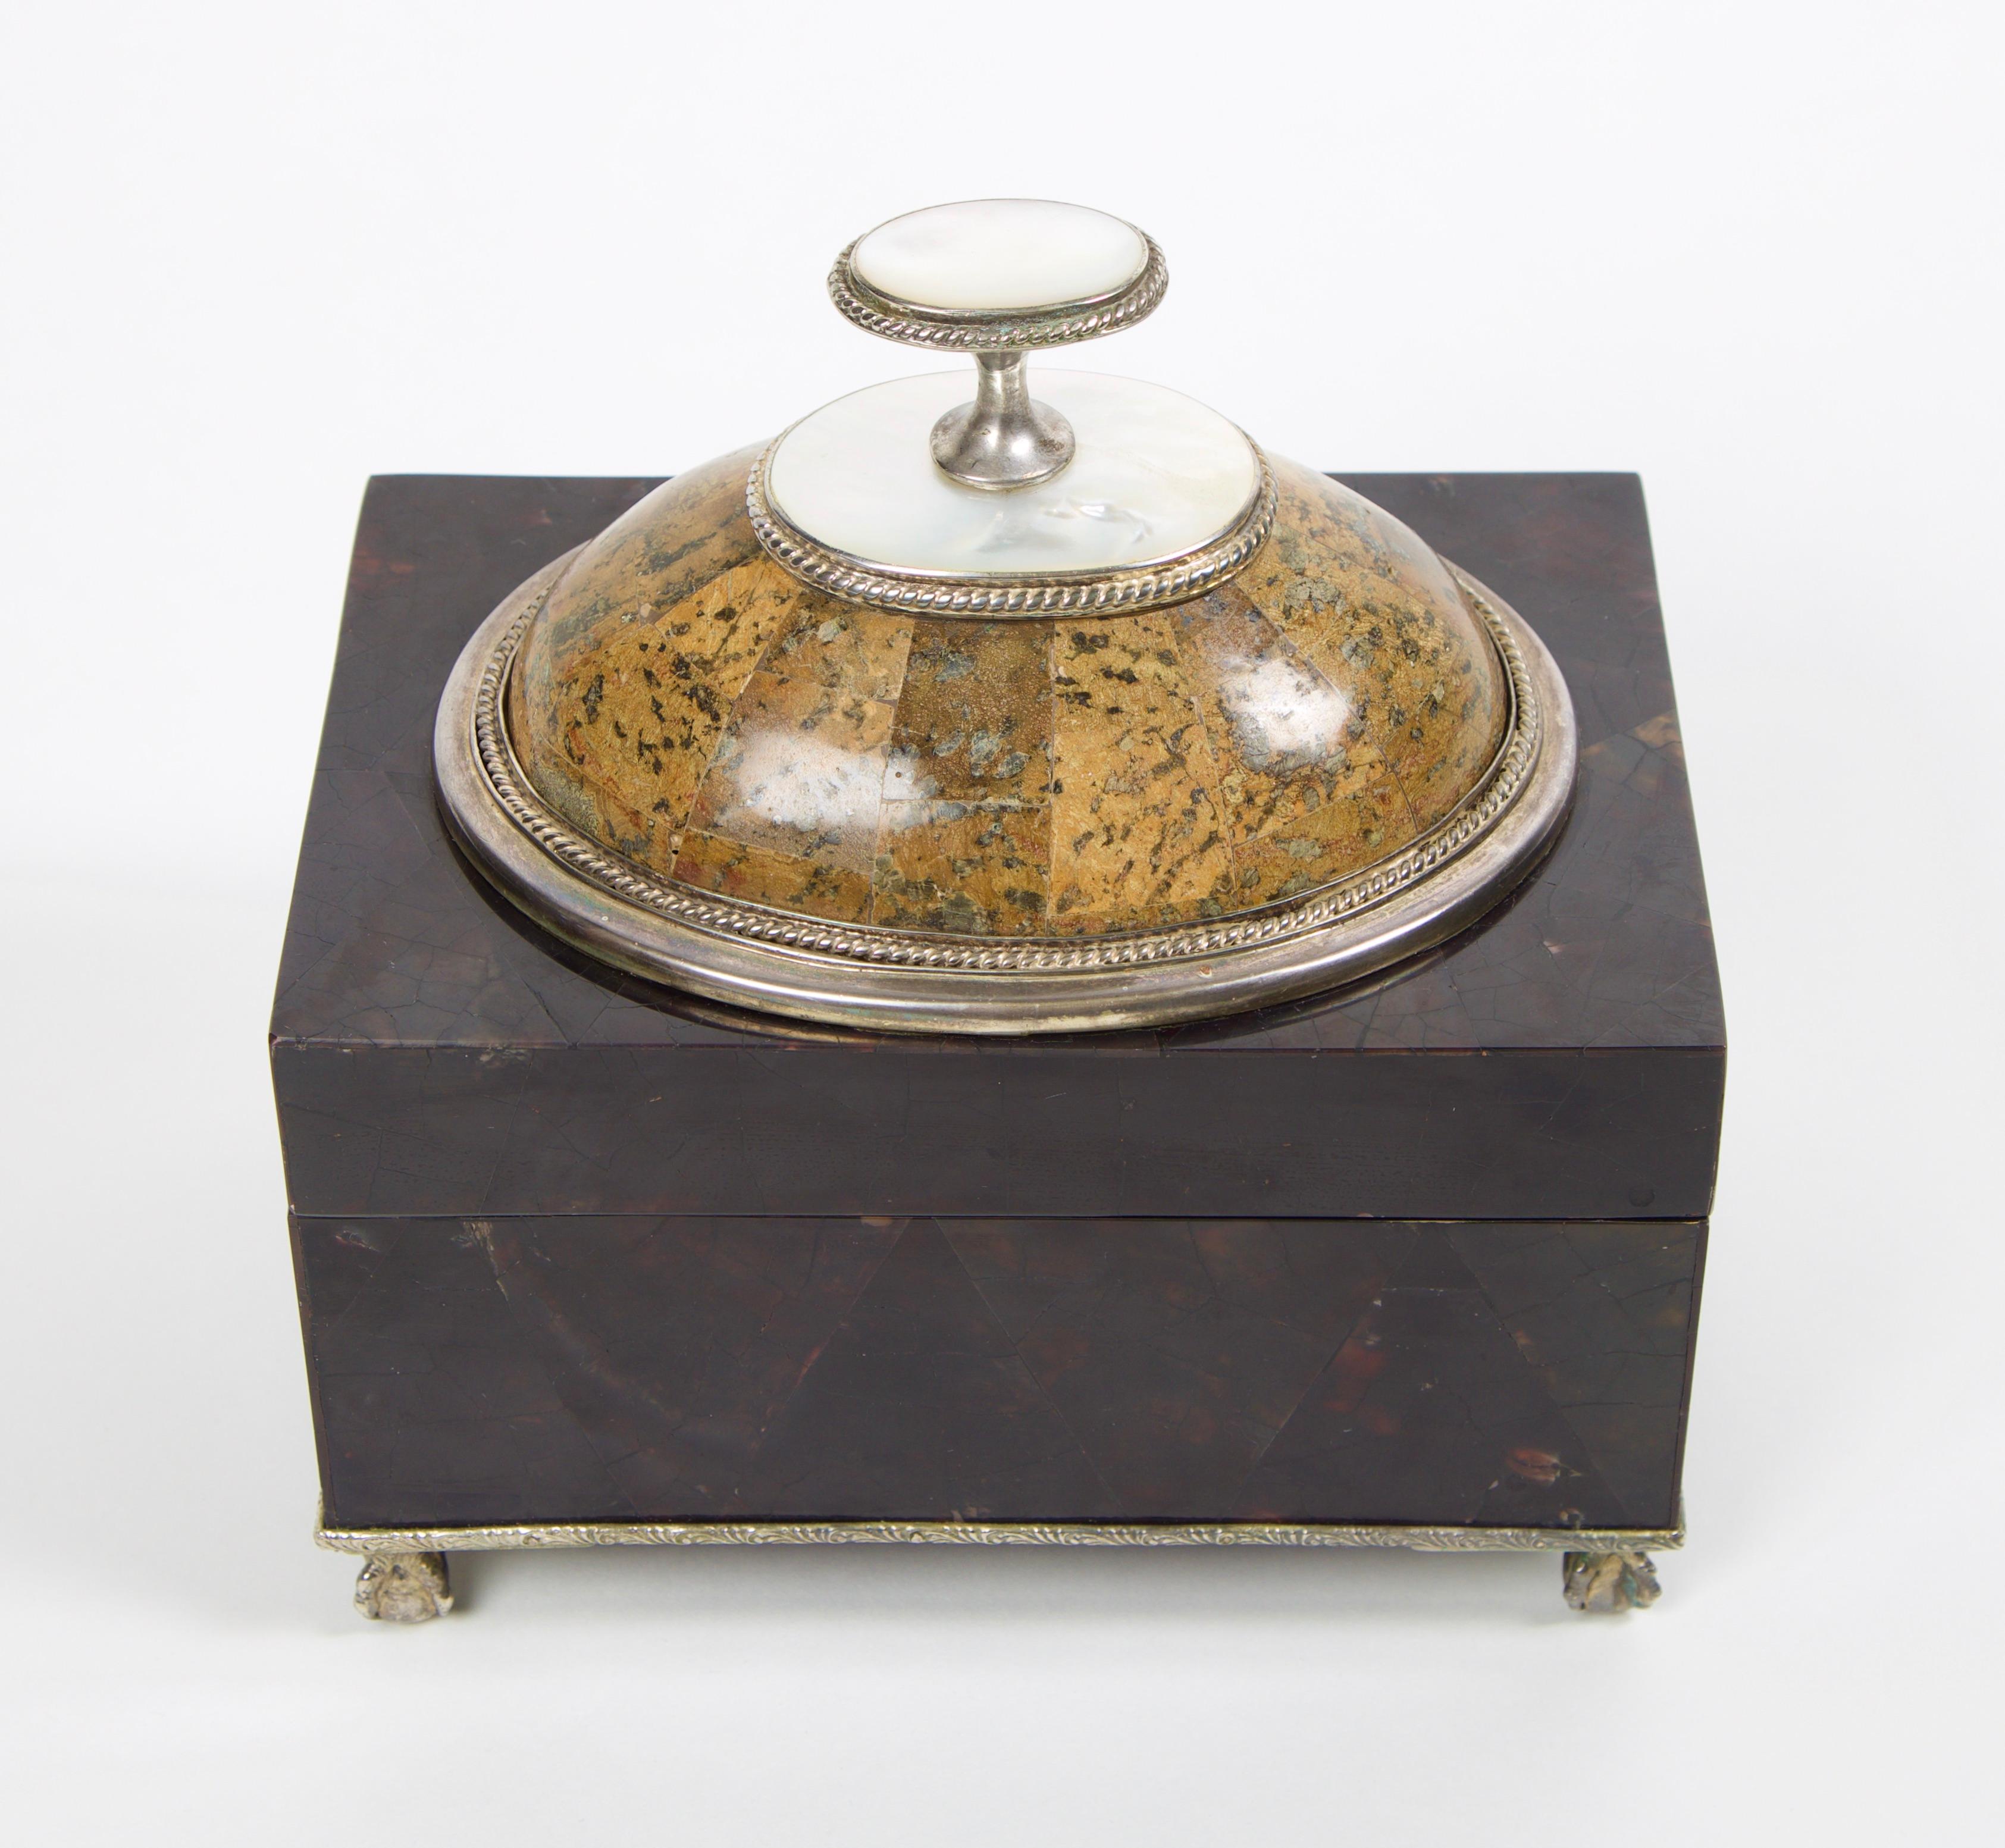 Maitland Smith tessellated stone box with a mother of pearl finial handle. The interior of the box is lined with a black felt and has a removable lid. The box rests on sterling silver ball and claw feet as well as the entirety of the box is framed